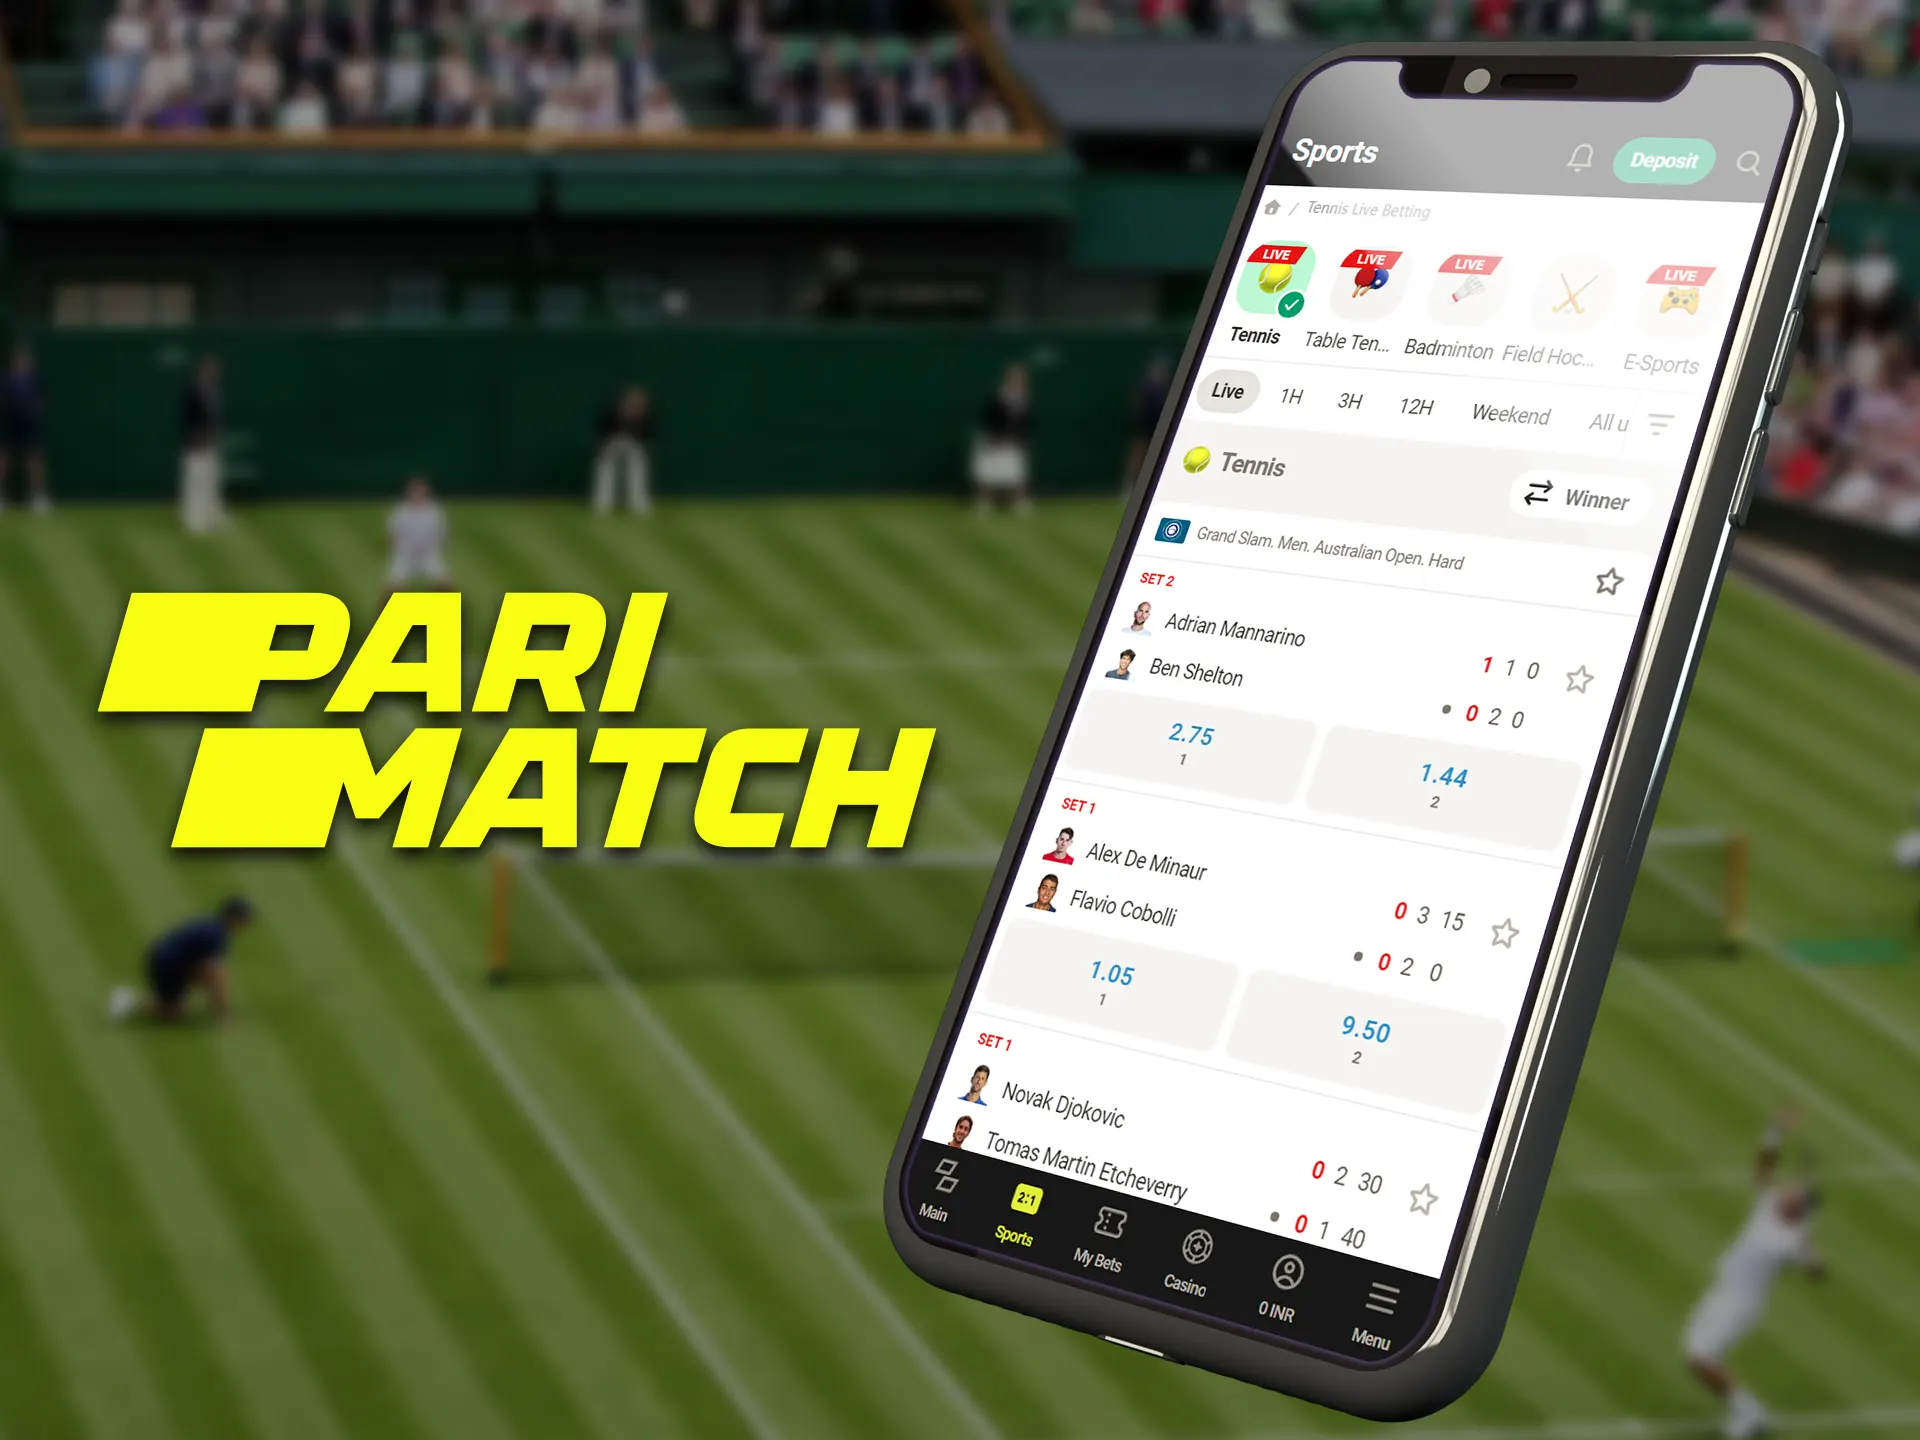 Parimatch mobile app allows you to bet on tennis with the highest odds.